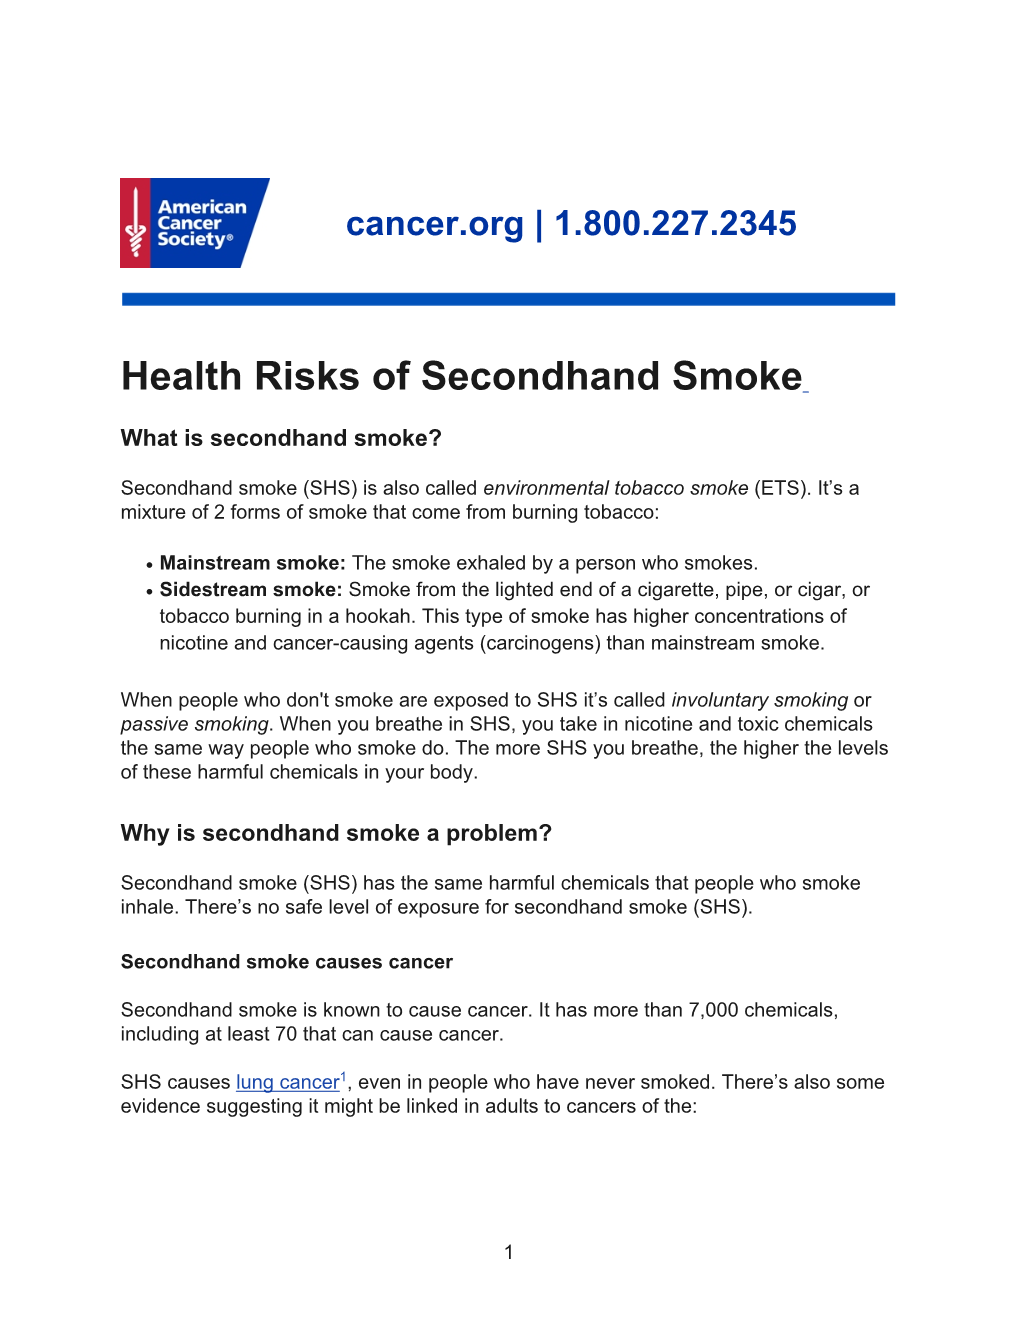 Health Risks of Secondhand Smoke